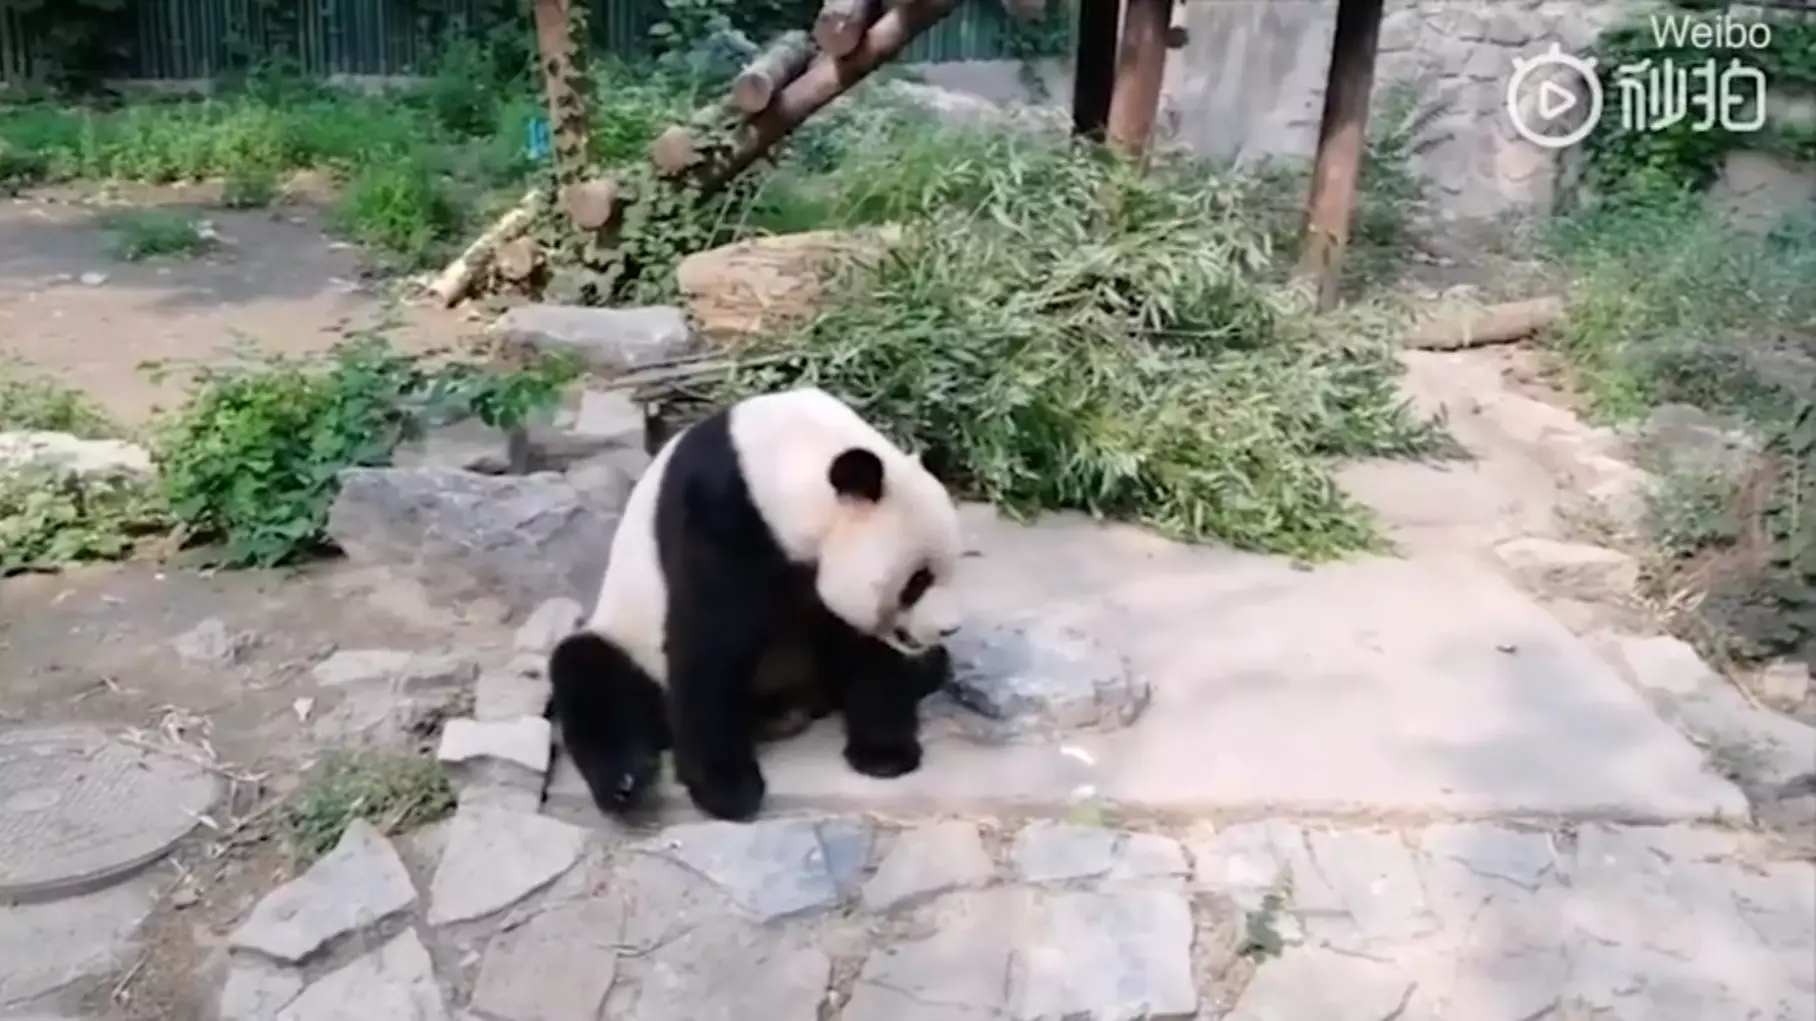 Tourists Filmed Throwing Rocks At Giant Panda In Chinese Zoo